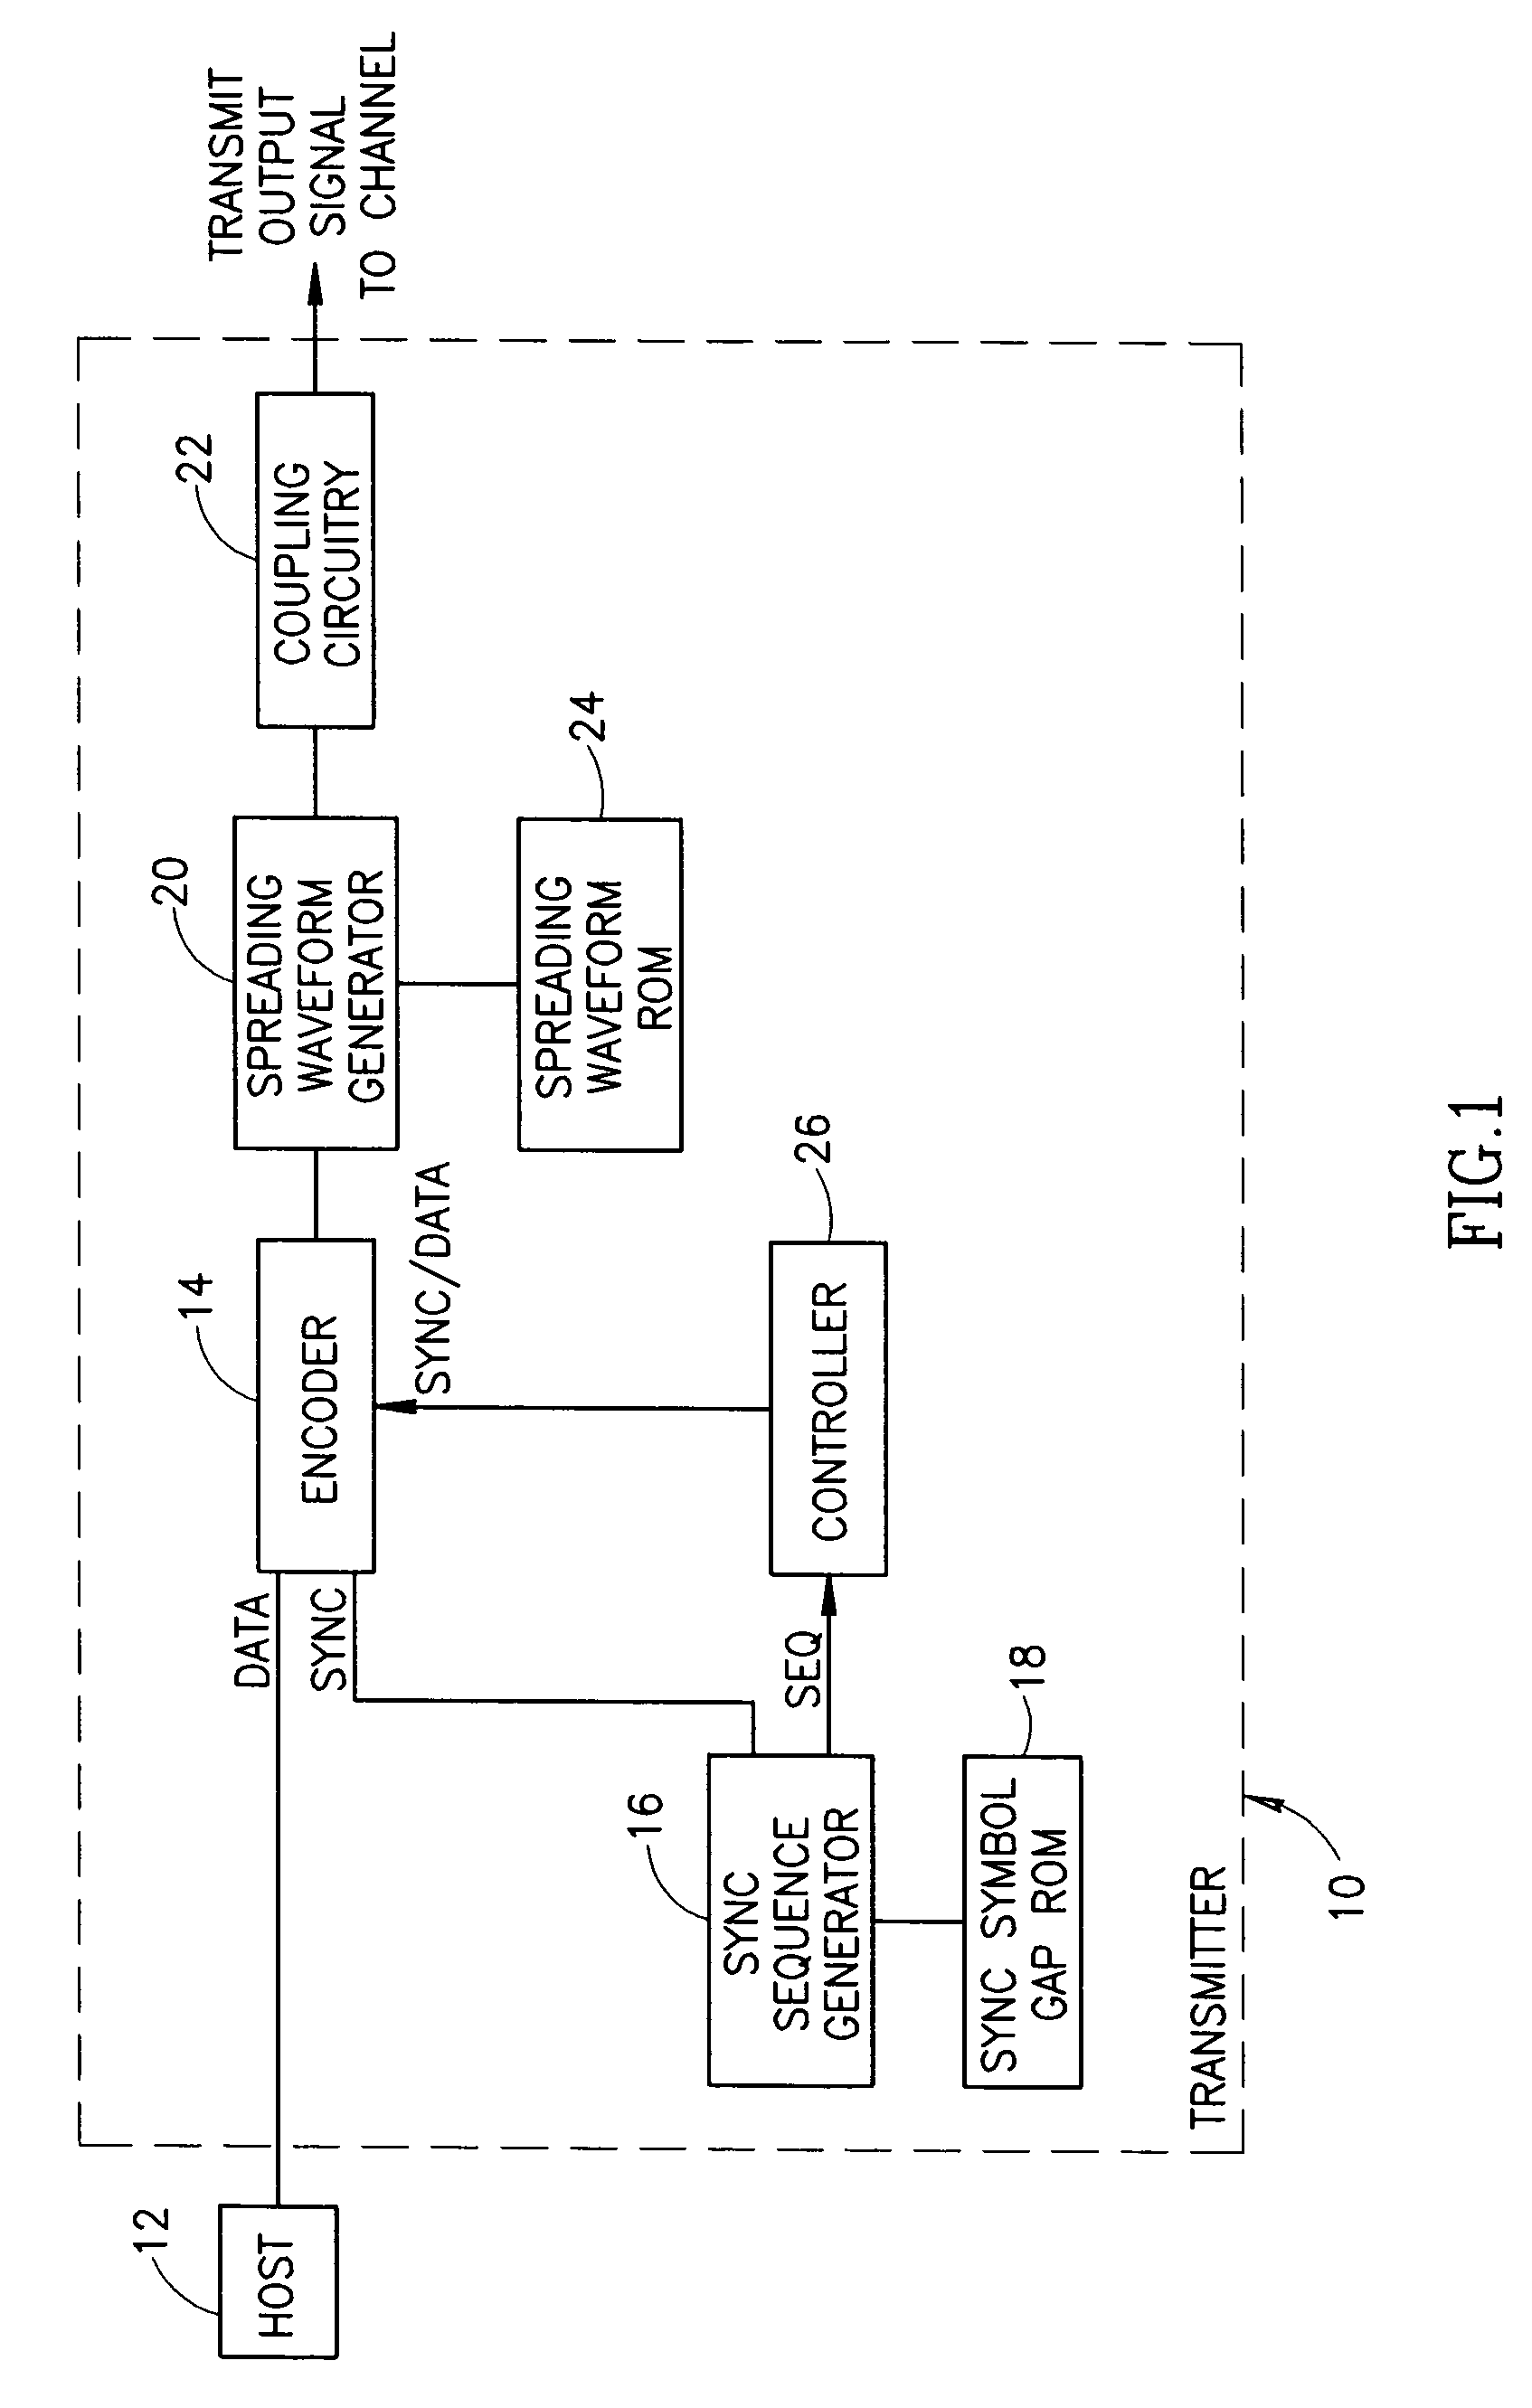 Method and apparatus for generating a synchronization sequence in a spread spectrum communications transceiver